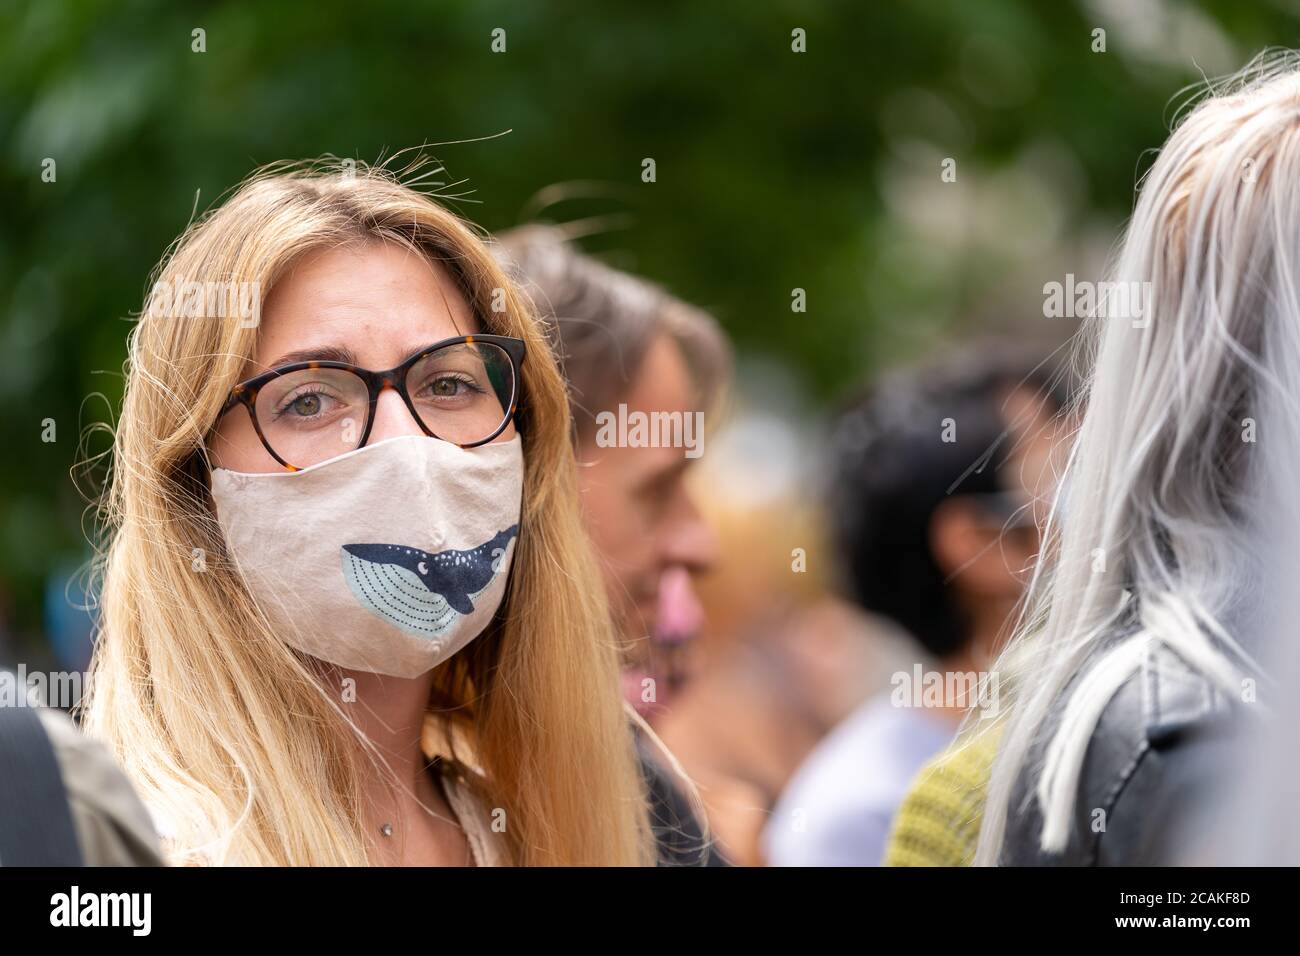 LONDON, ENGLAND - JULY 28, 2020: Beautiful female Johnny Depp fan outside the High Court in London wearing a face mask  during the Court case against Stock Photo